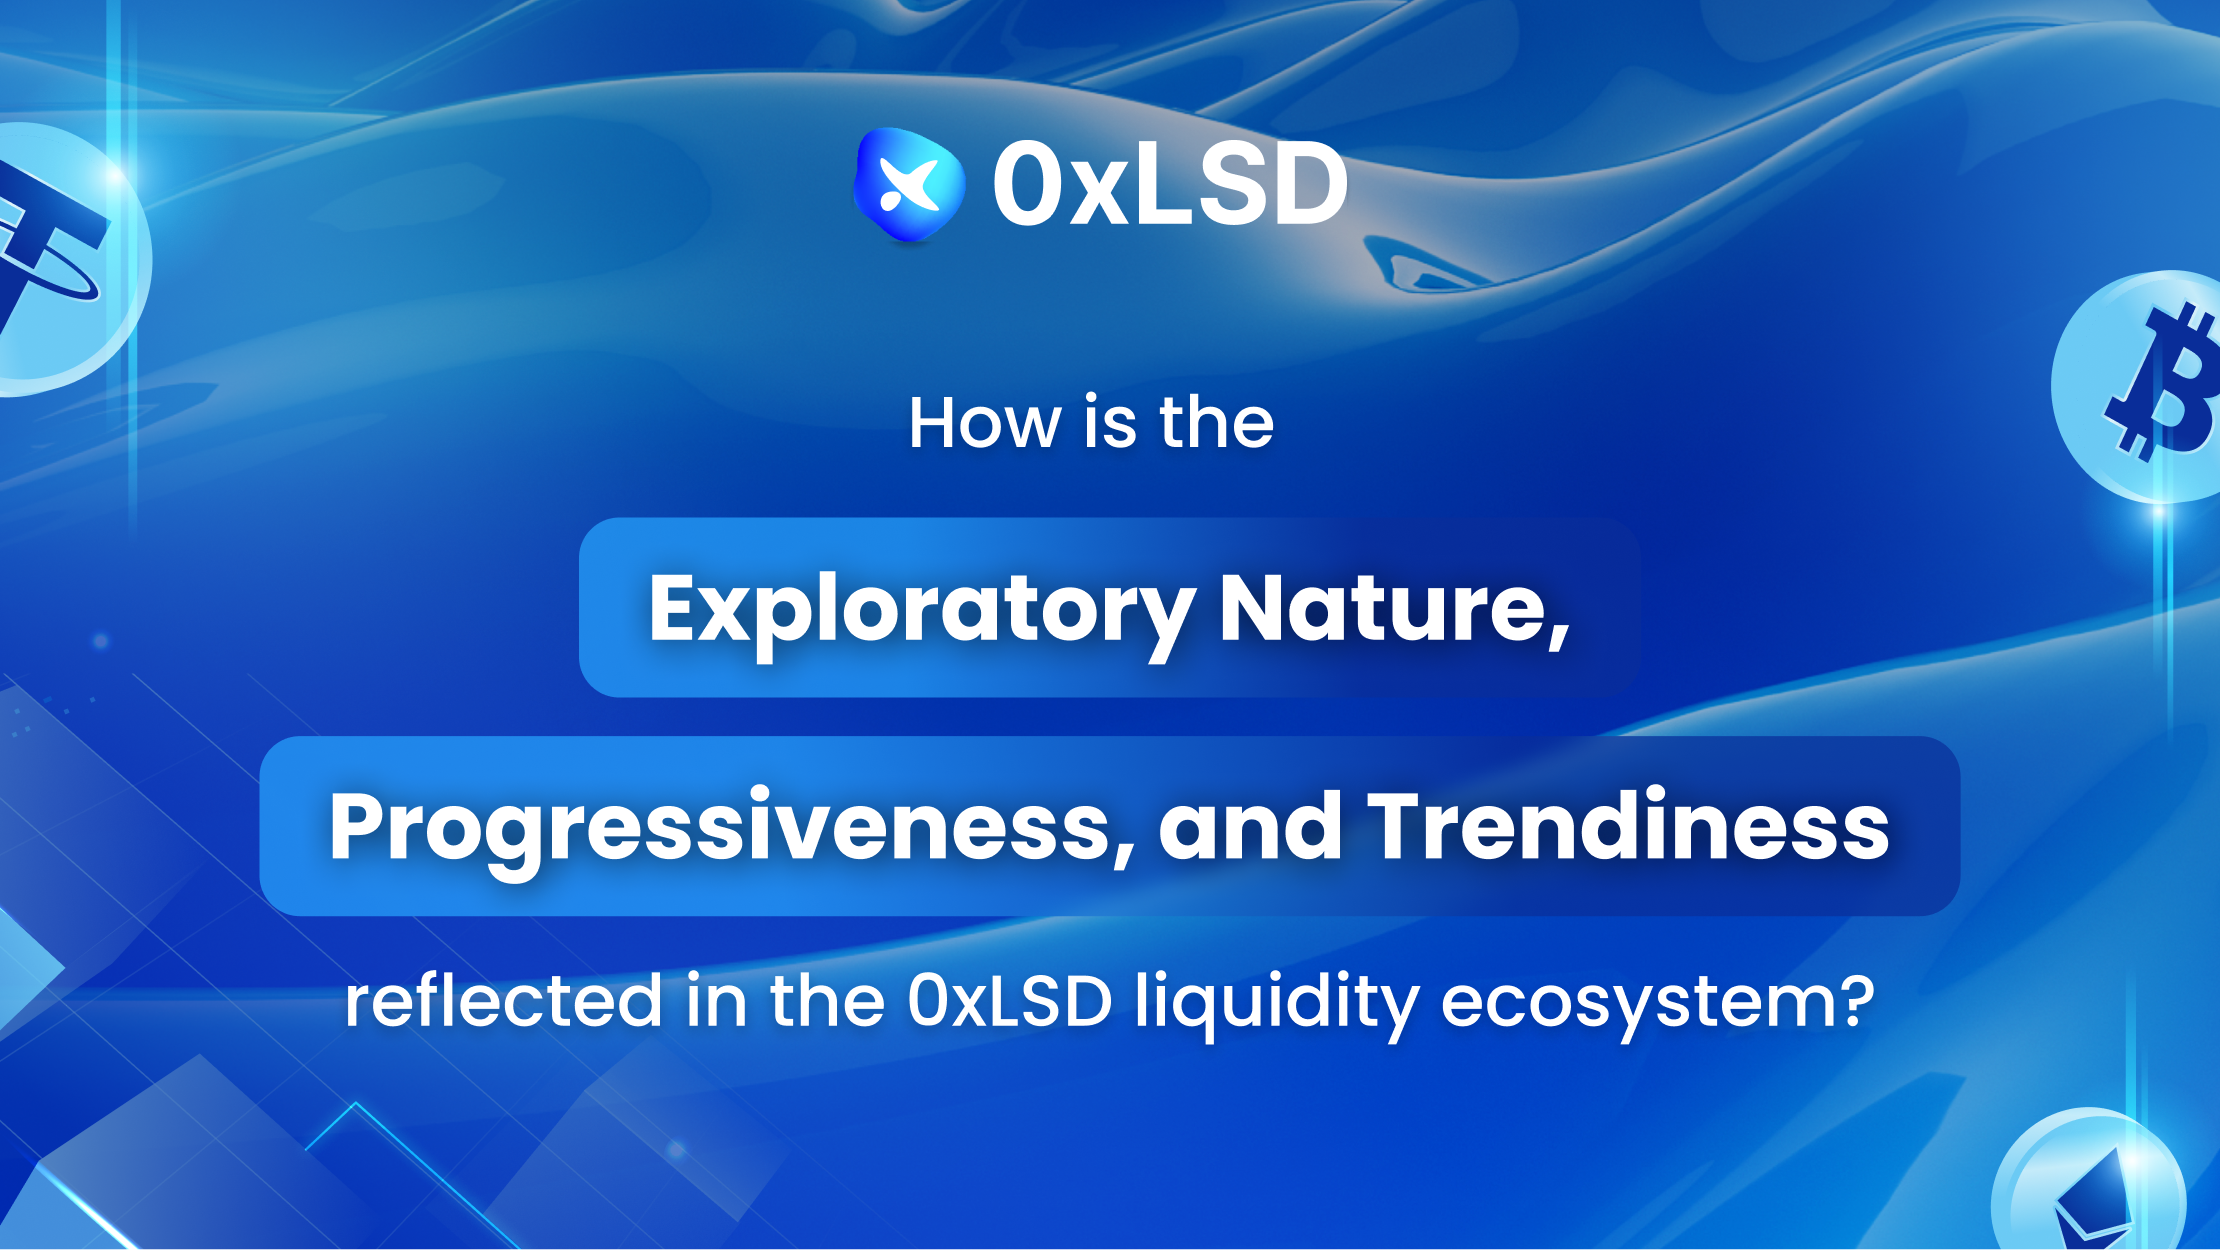 How is the exploratory nature, progressiveness, and trendiness reflected in the 0xLSD liquidity ecosystem?